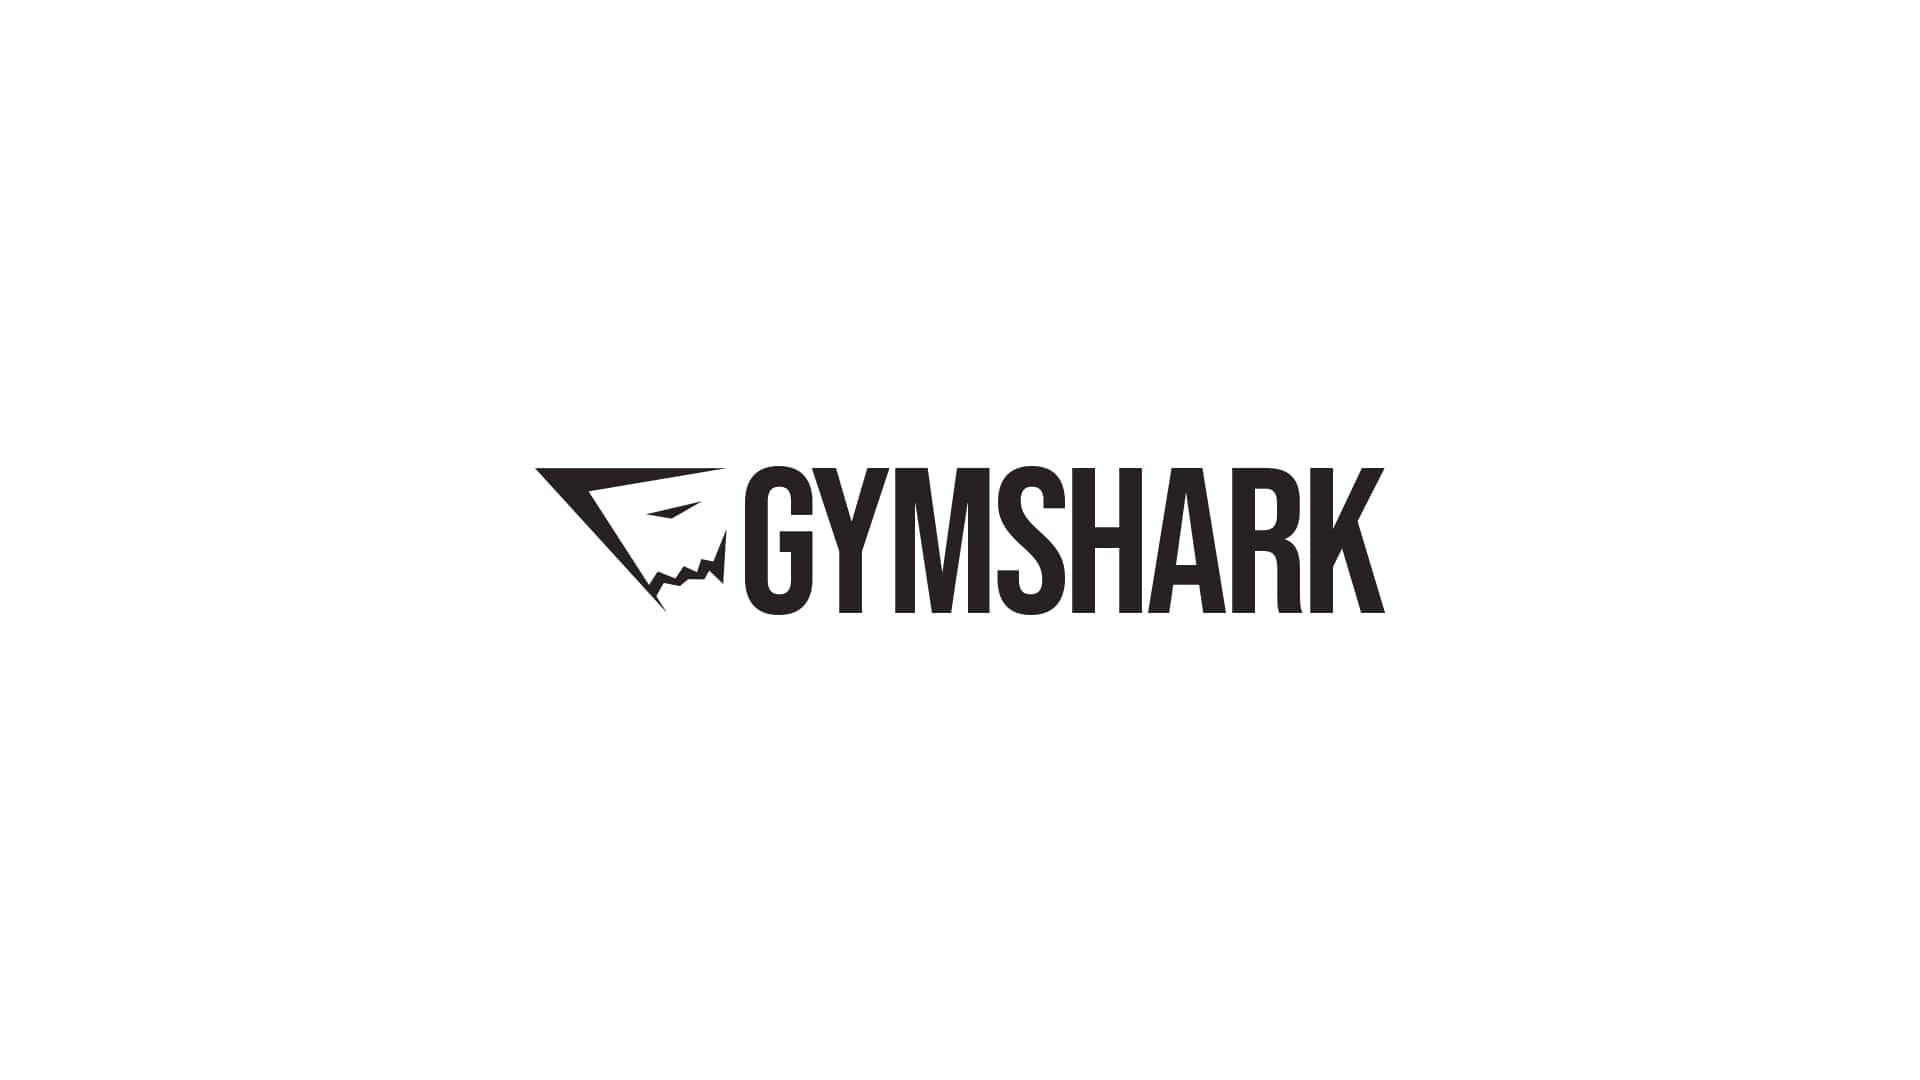 GYMSHARK - Up to 60% Off Sale